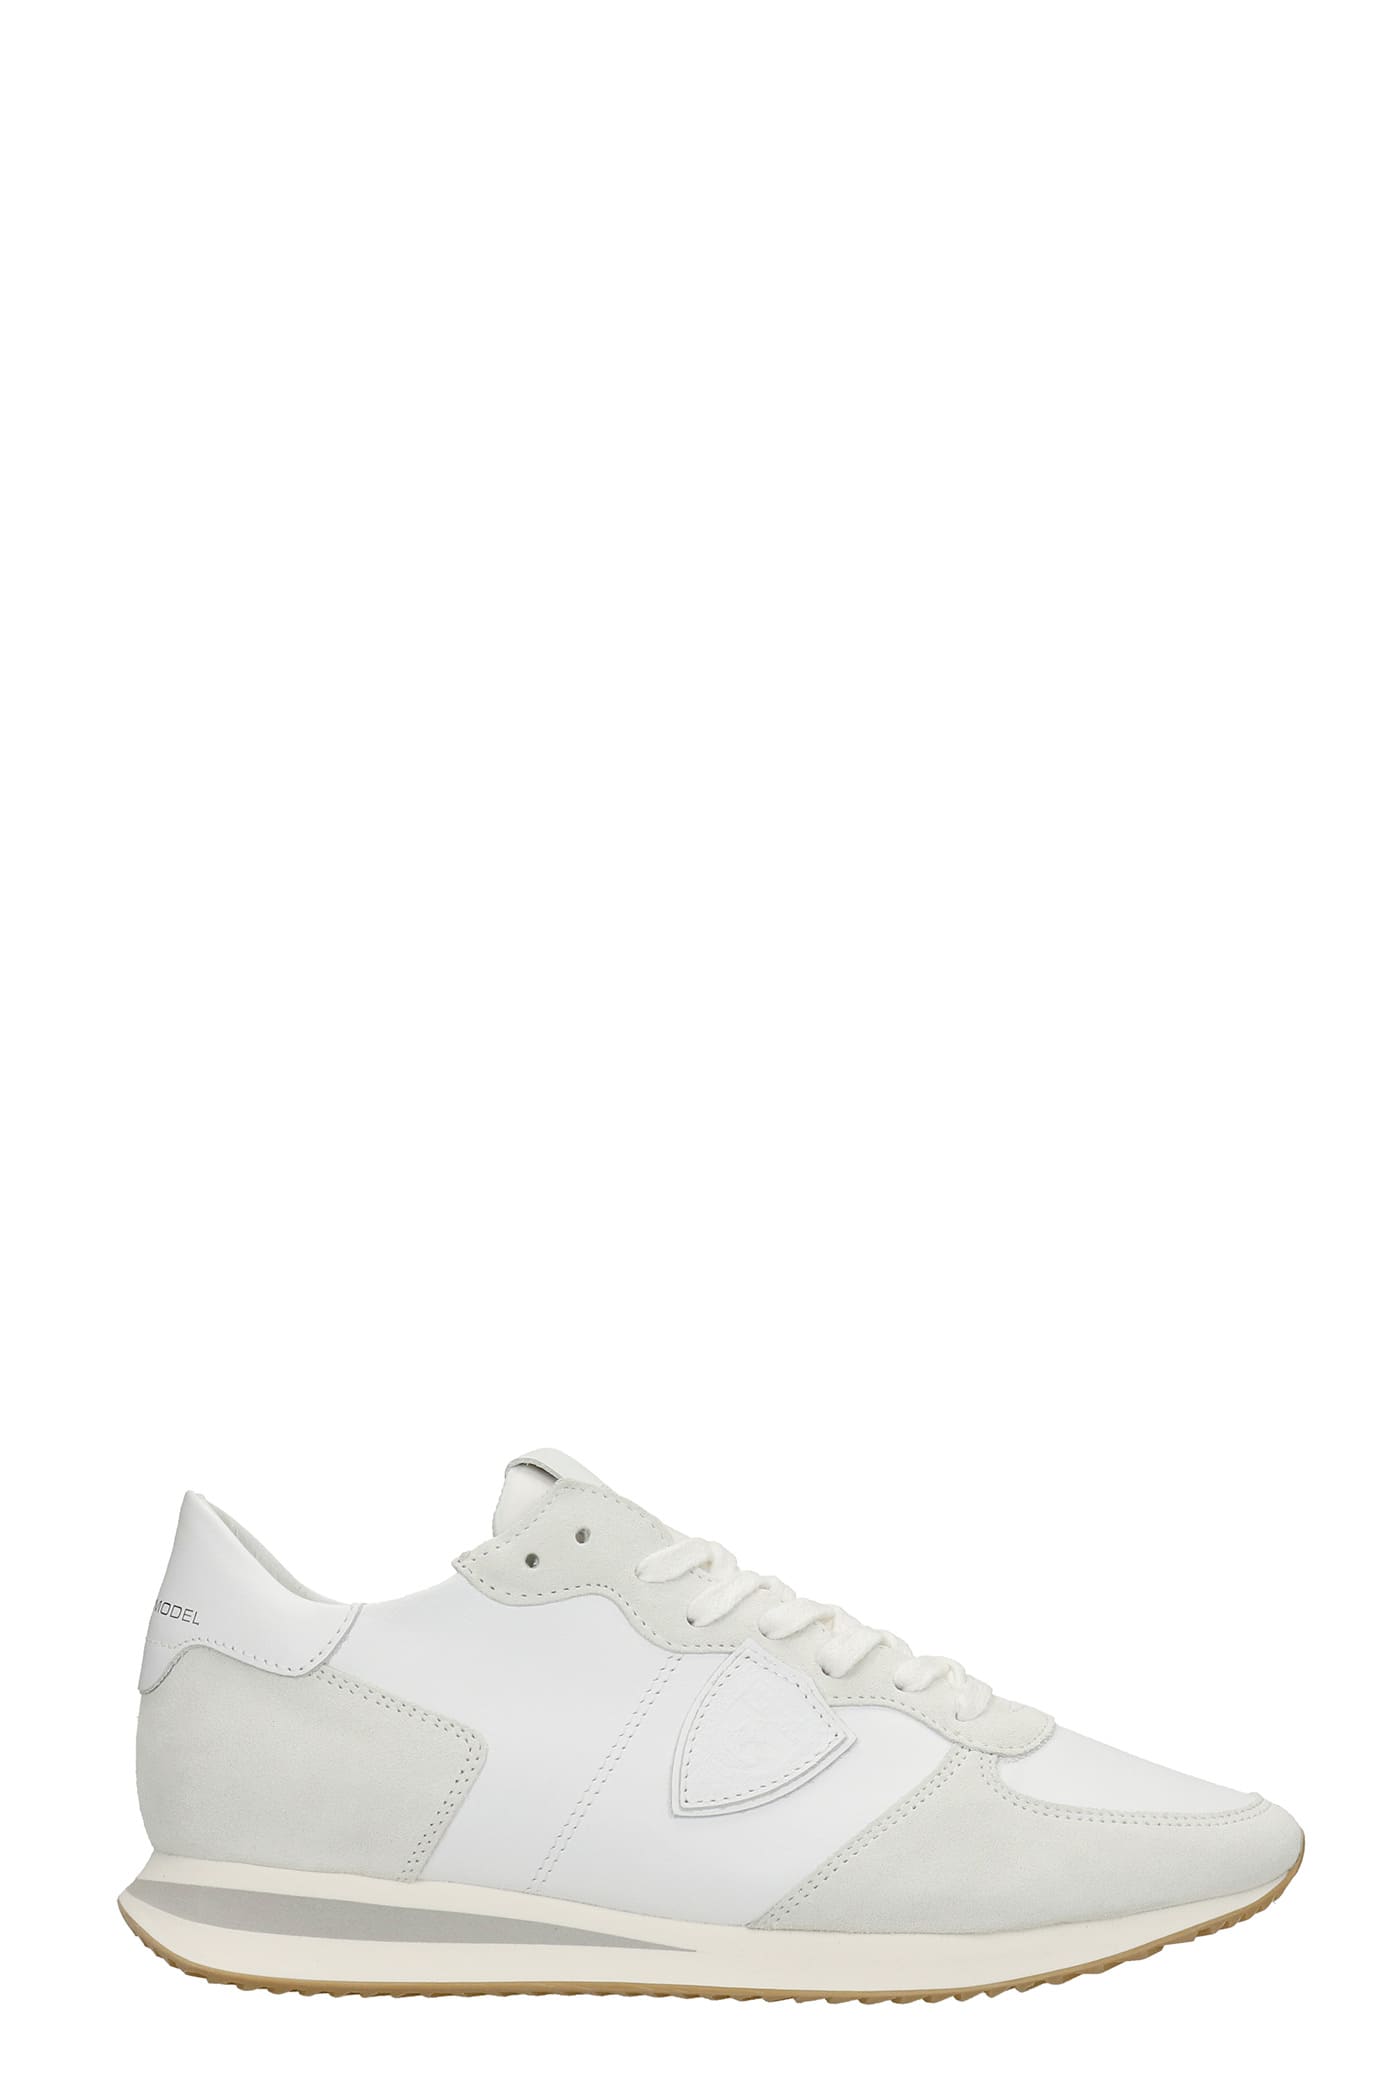 Philippe Model Trpx Sneakers In White Suede And Leather